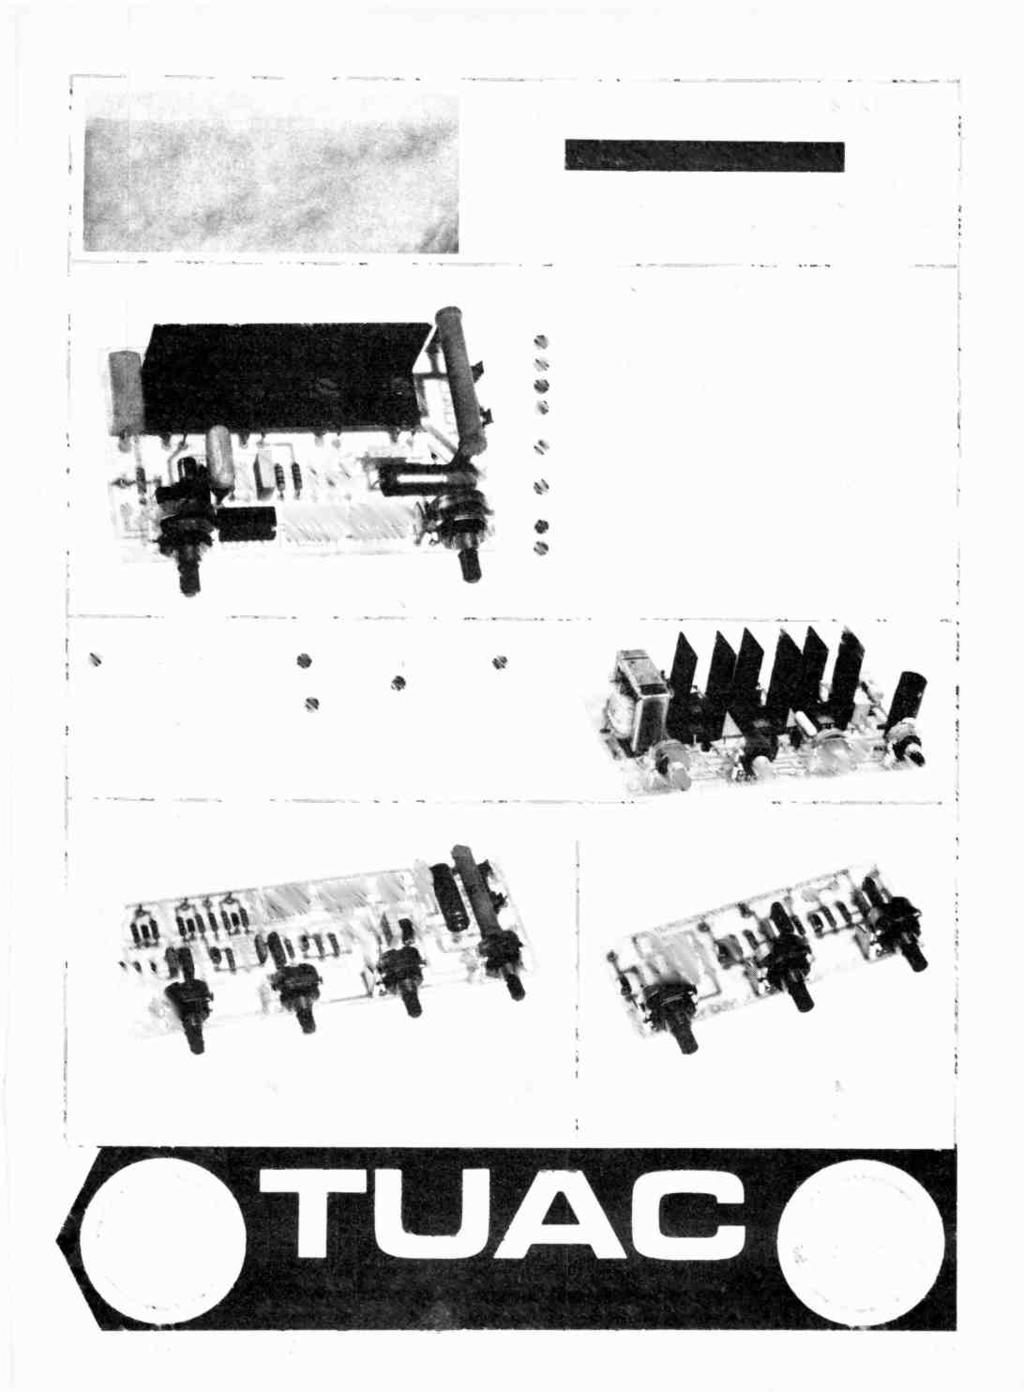 TUAC ANNOUNCES THE LATEST 1976 STEREO DISCO MIXER 75 Printing schedule precluded illustration. However send now for details and specification. NEW!